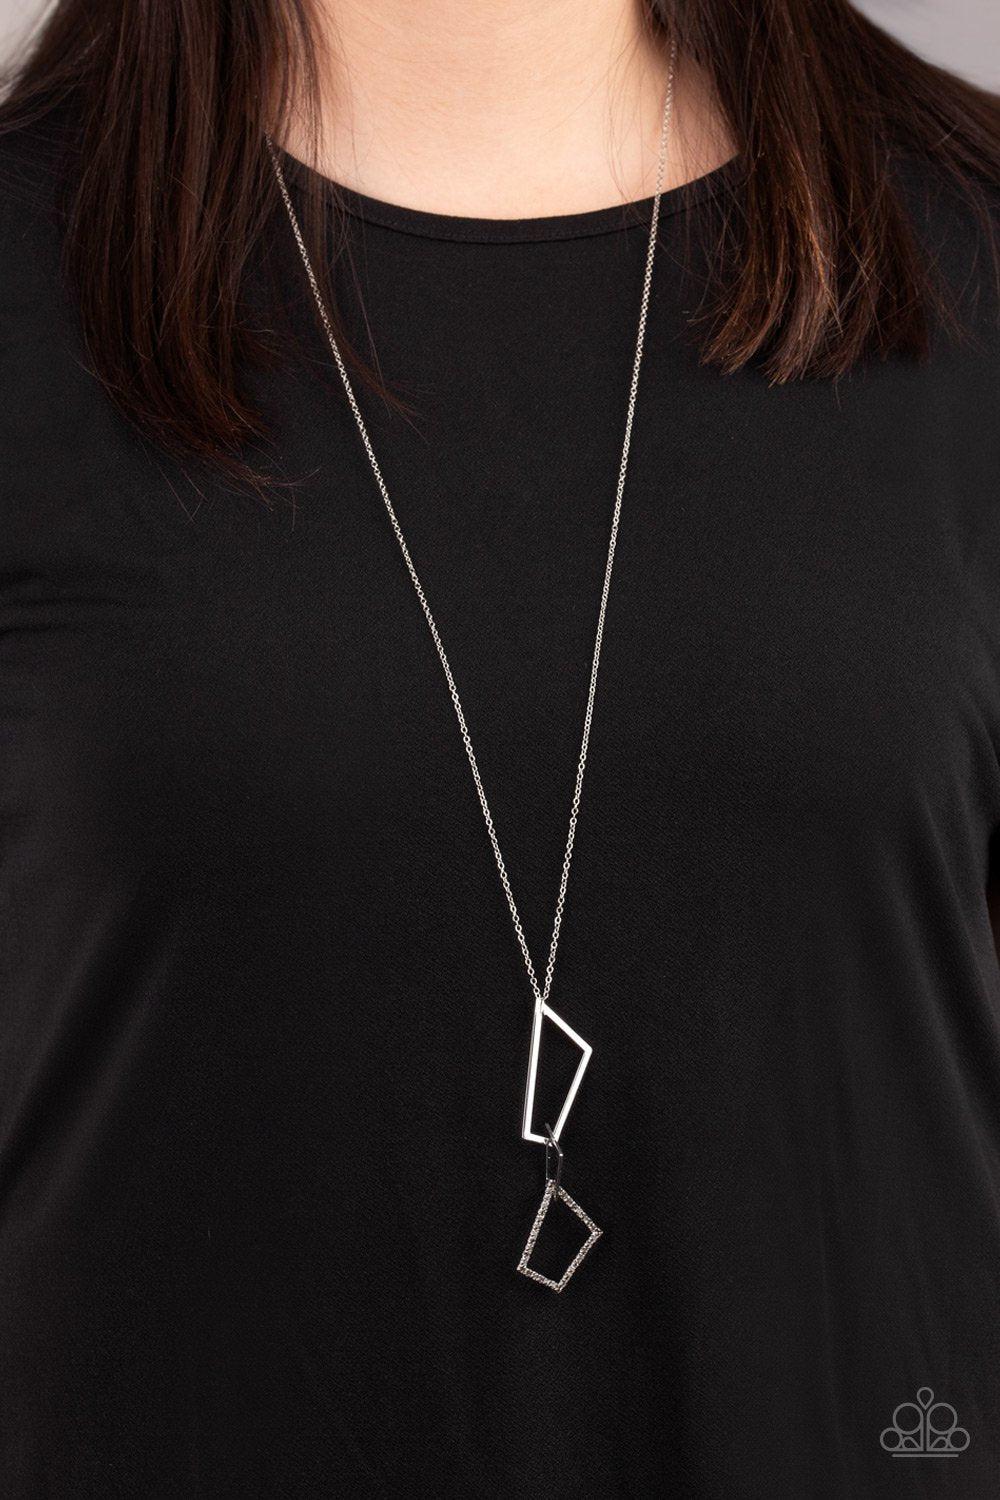 Shapely Silhouettes Silver Necklace - Paparazzi Accessories - lightbox -CarasShop.com - $5 Jewelry by Cara Jewels